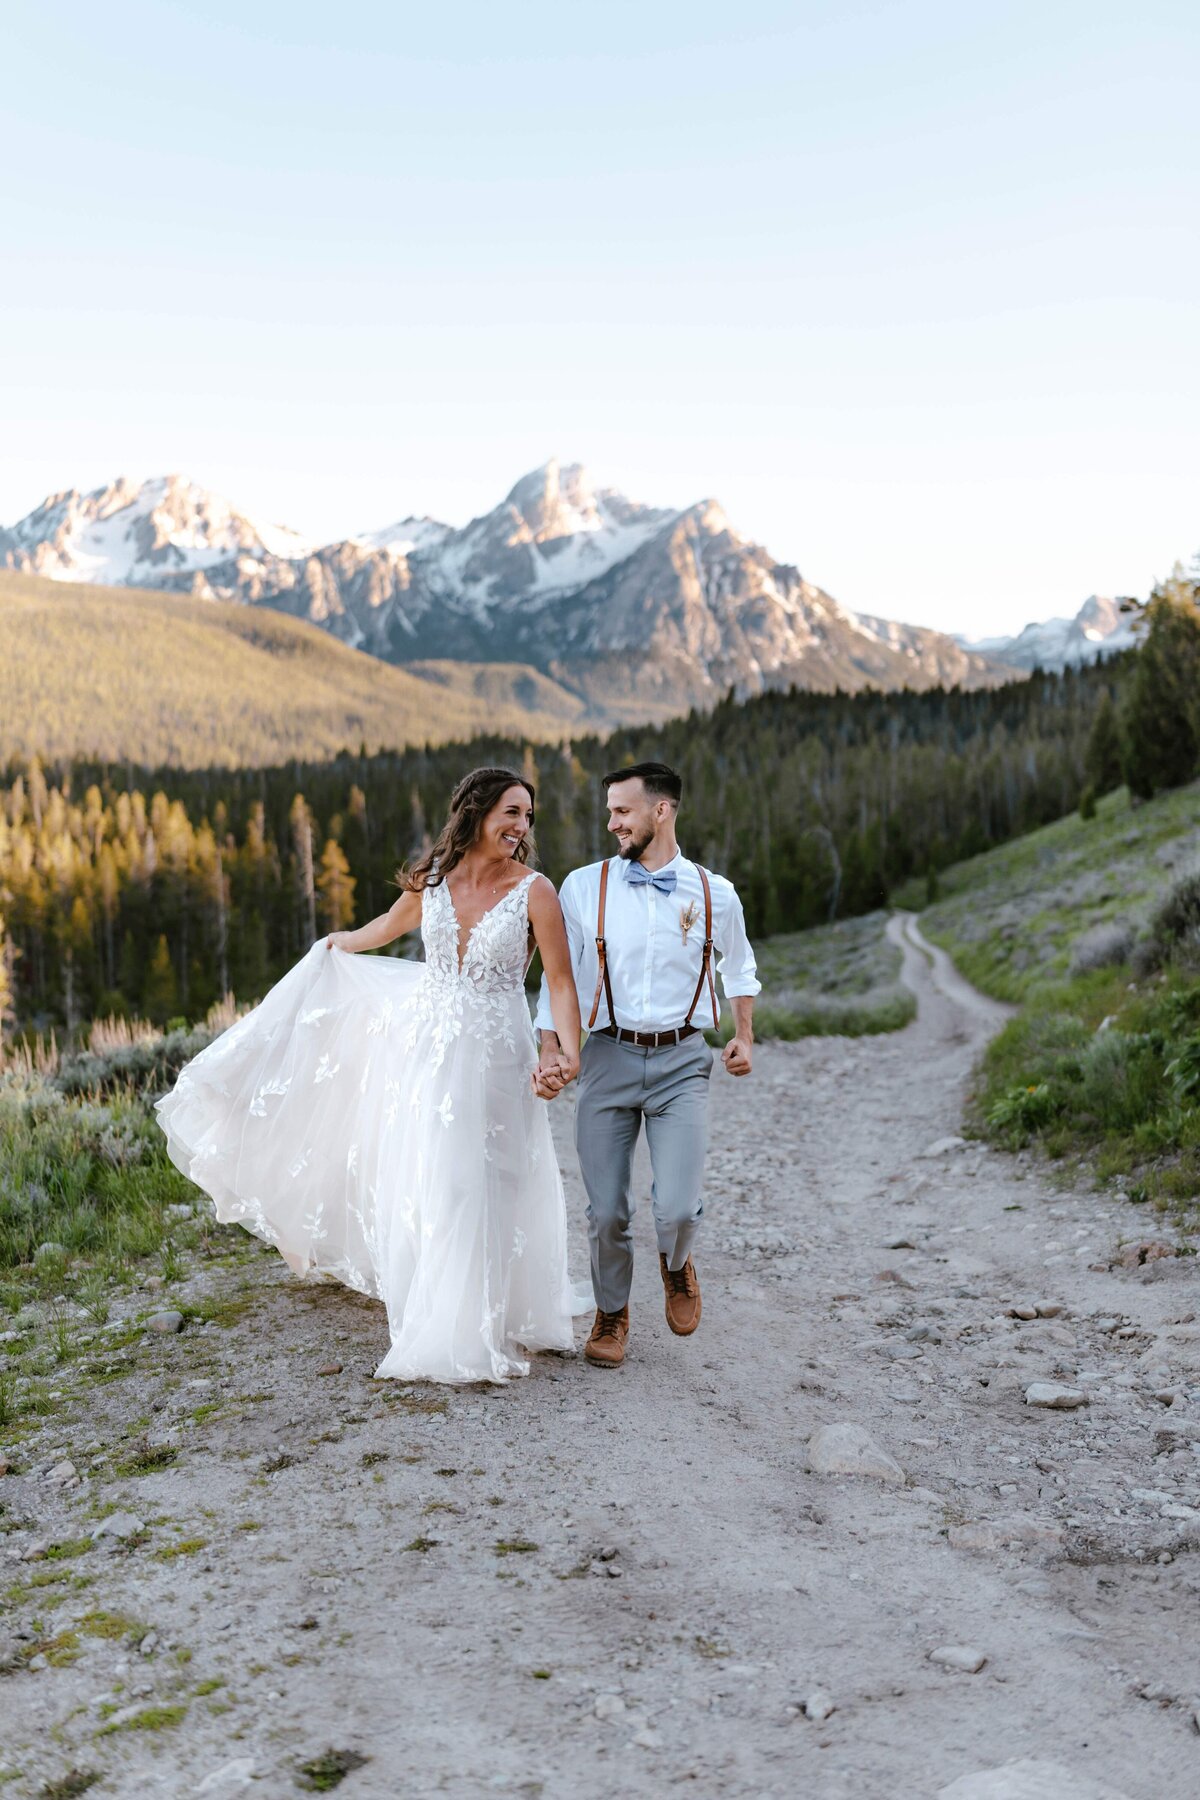 A bride and groom running up a dirt road in front of the Sawtooth Mountains in Idaho